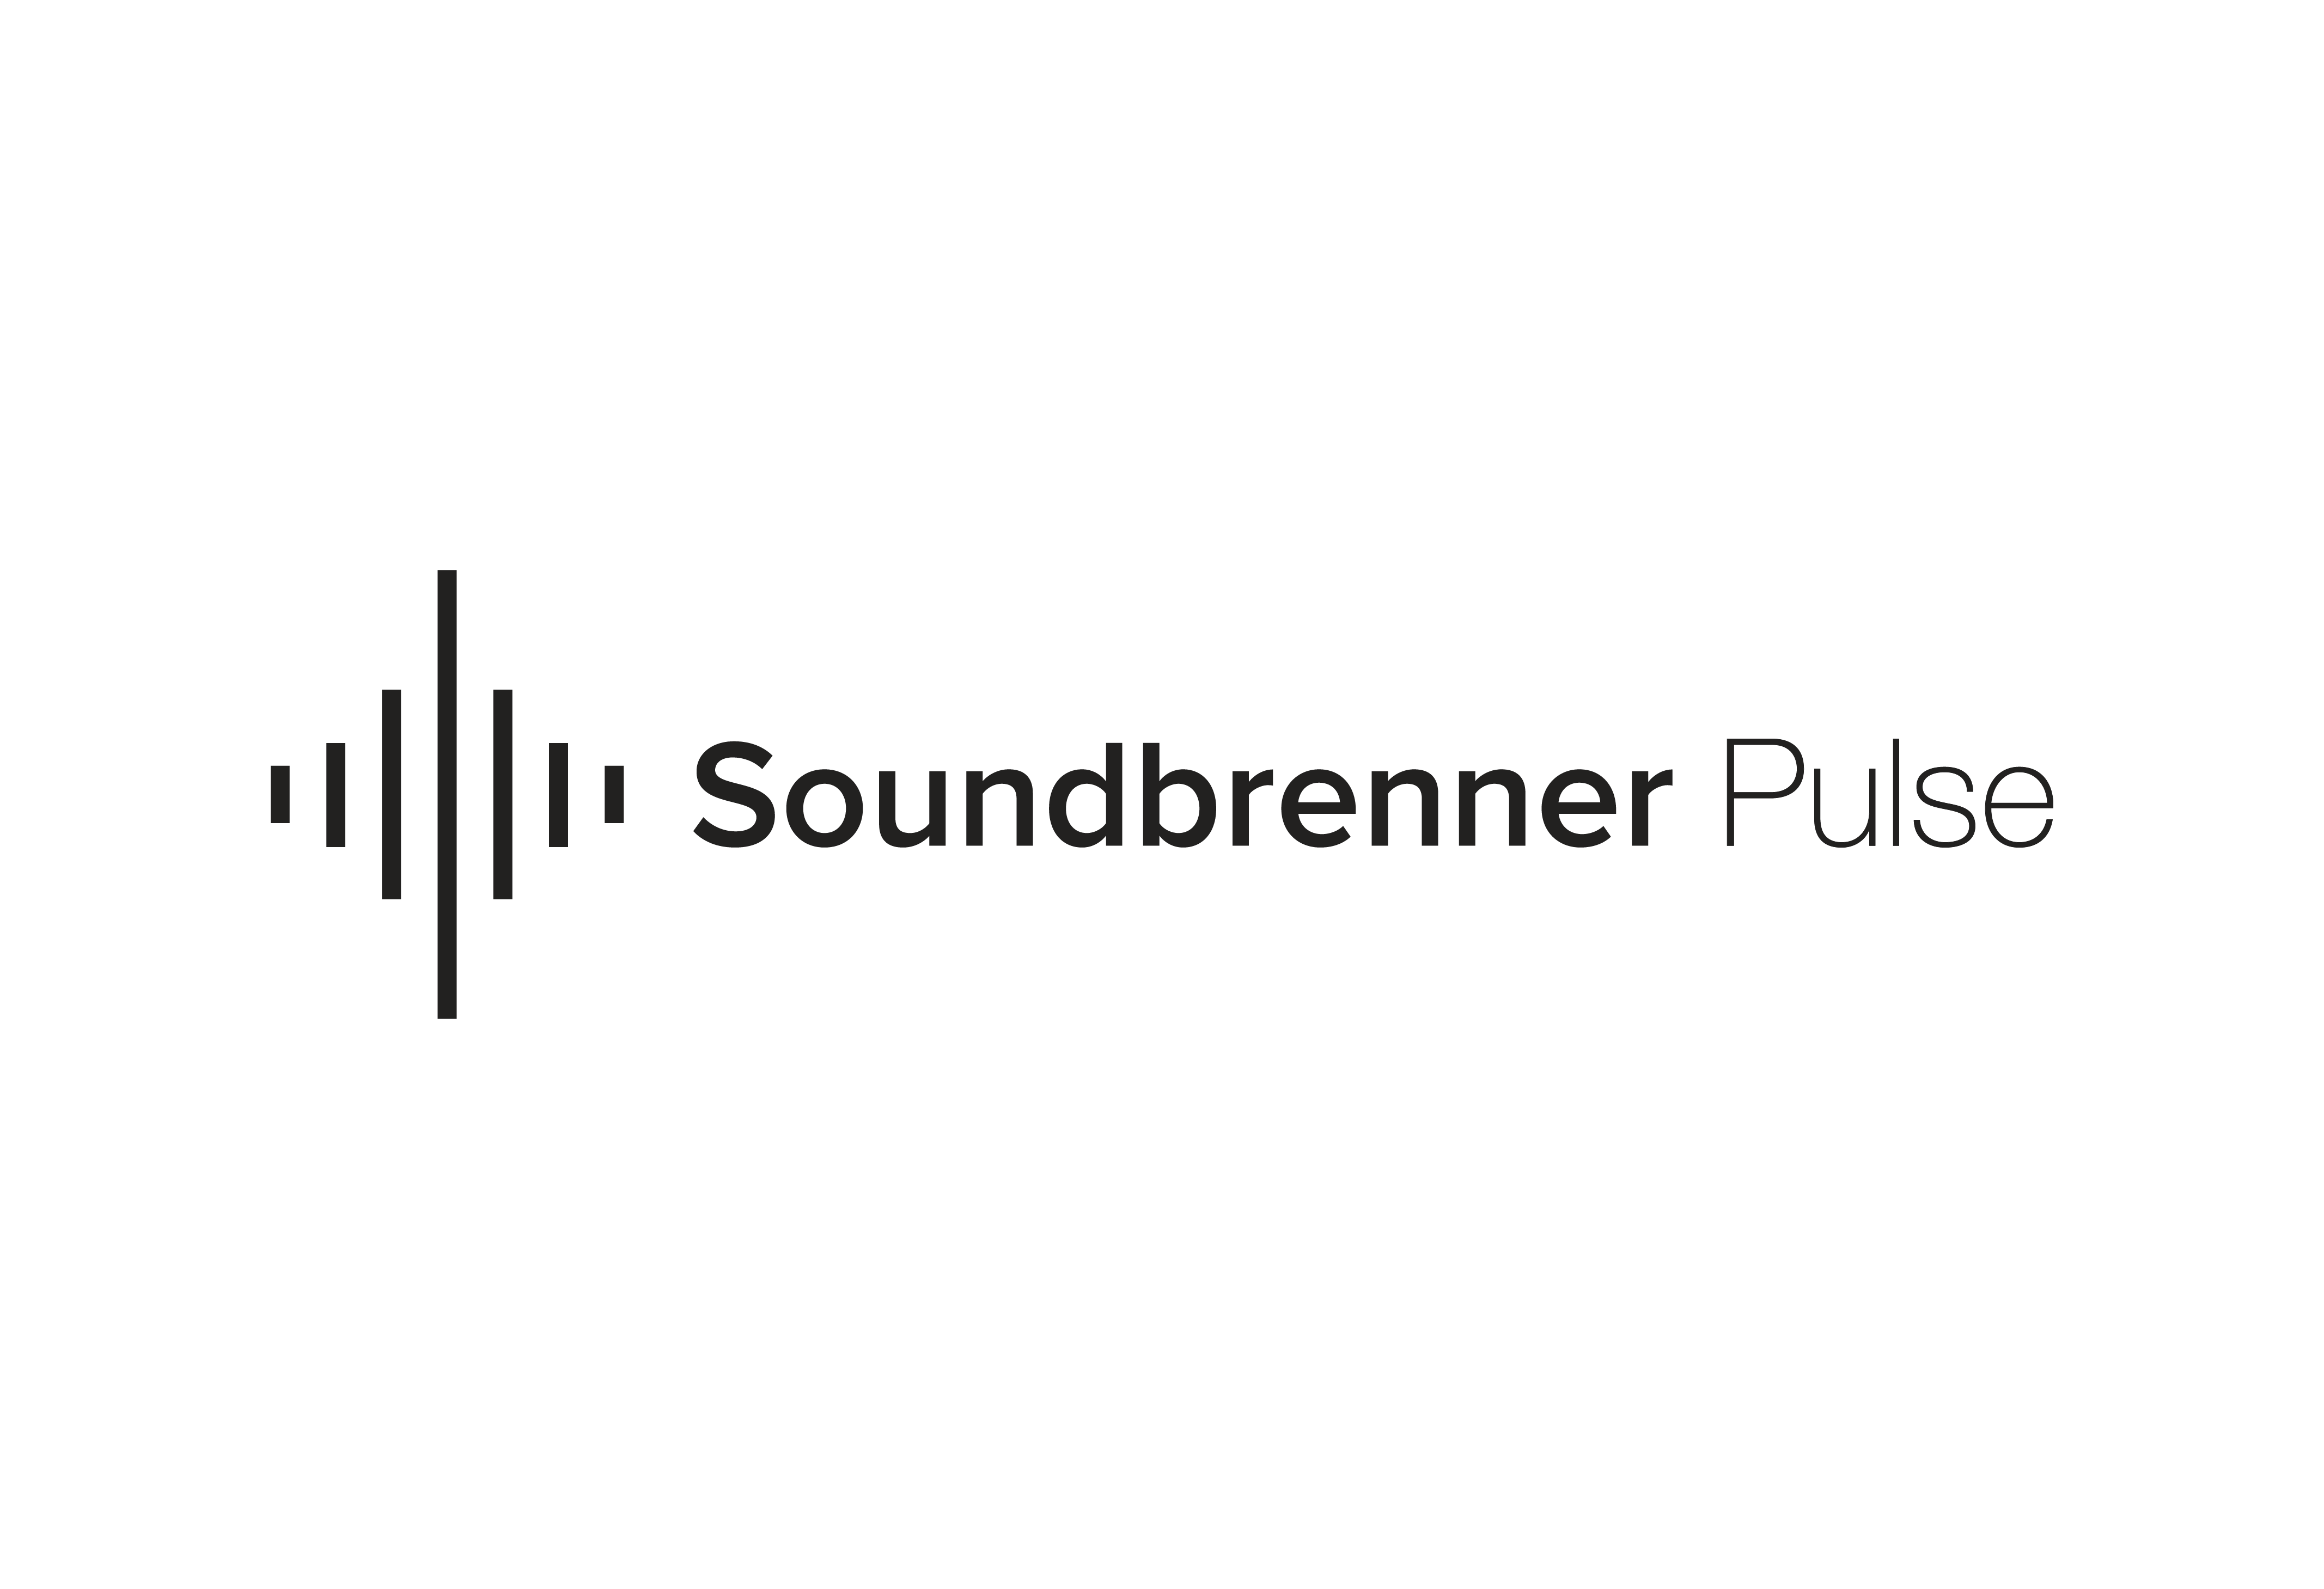 Soundbrenner Pulse, Comprehensive Review, Wearable Technology, Wearable Metronome, Music Tech Reviews, Independent Music, Drummer Wearing Soundbrenner Pulse, 